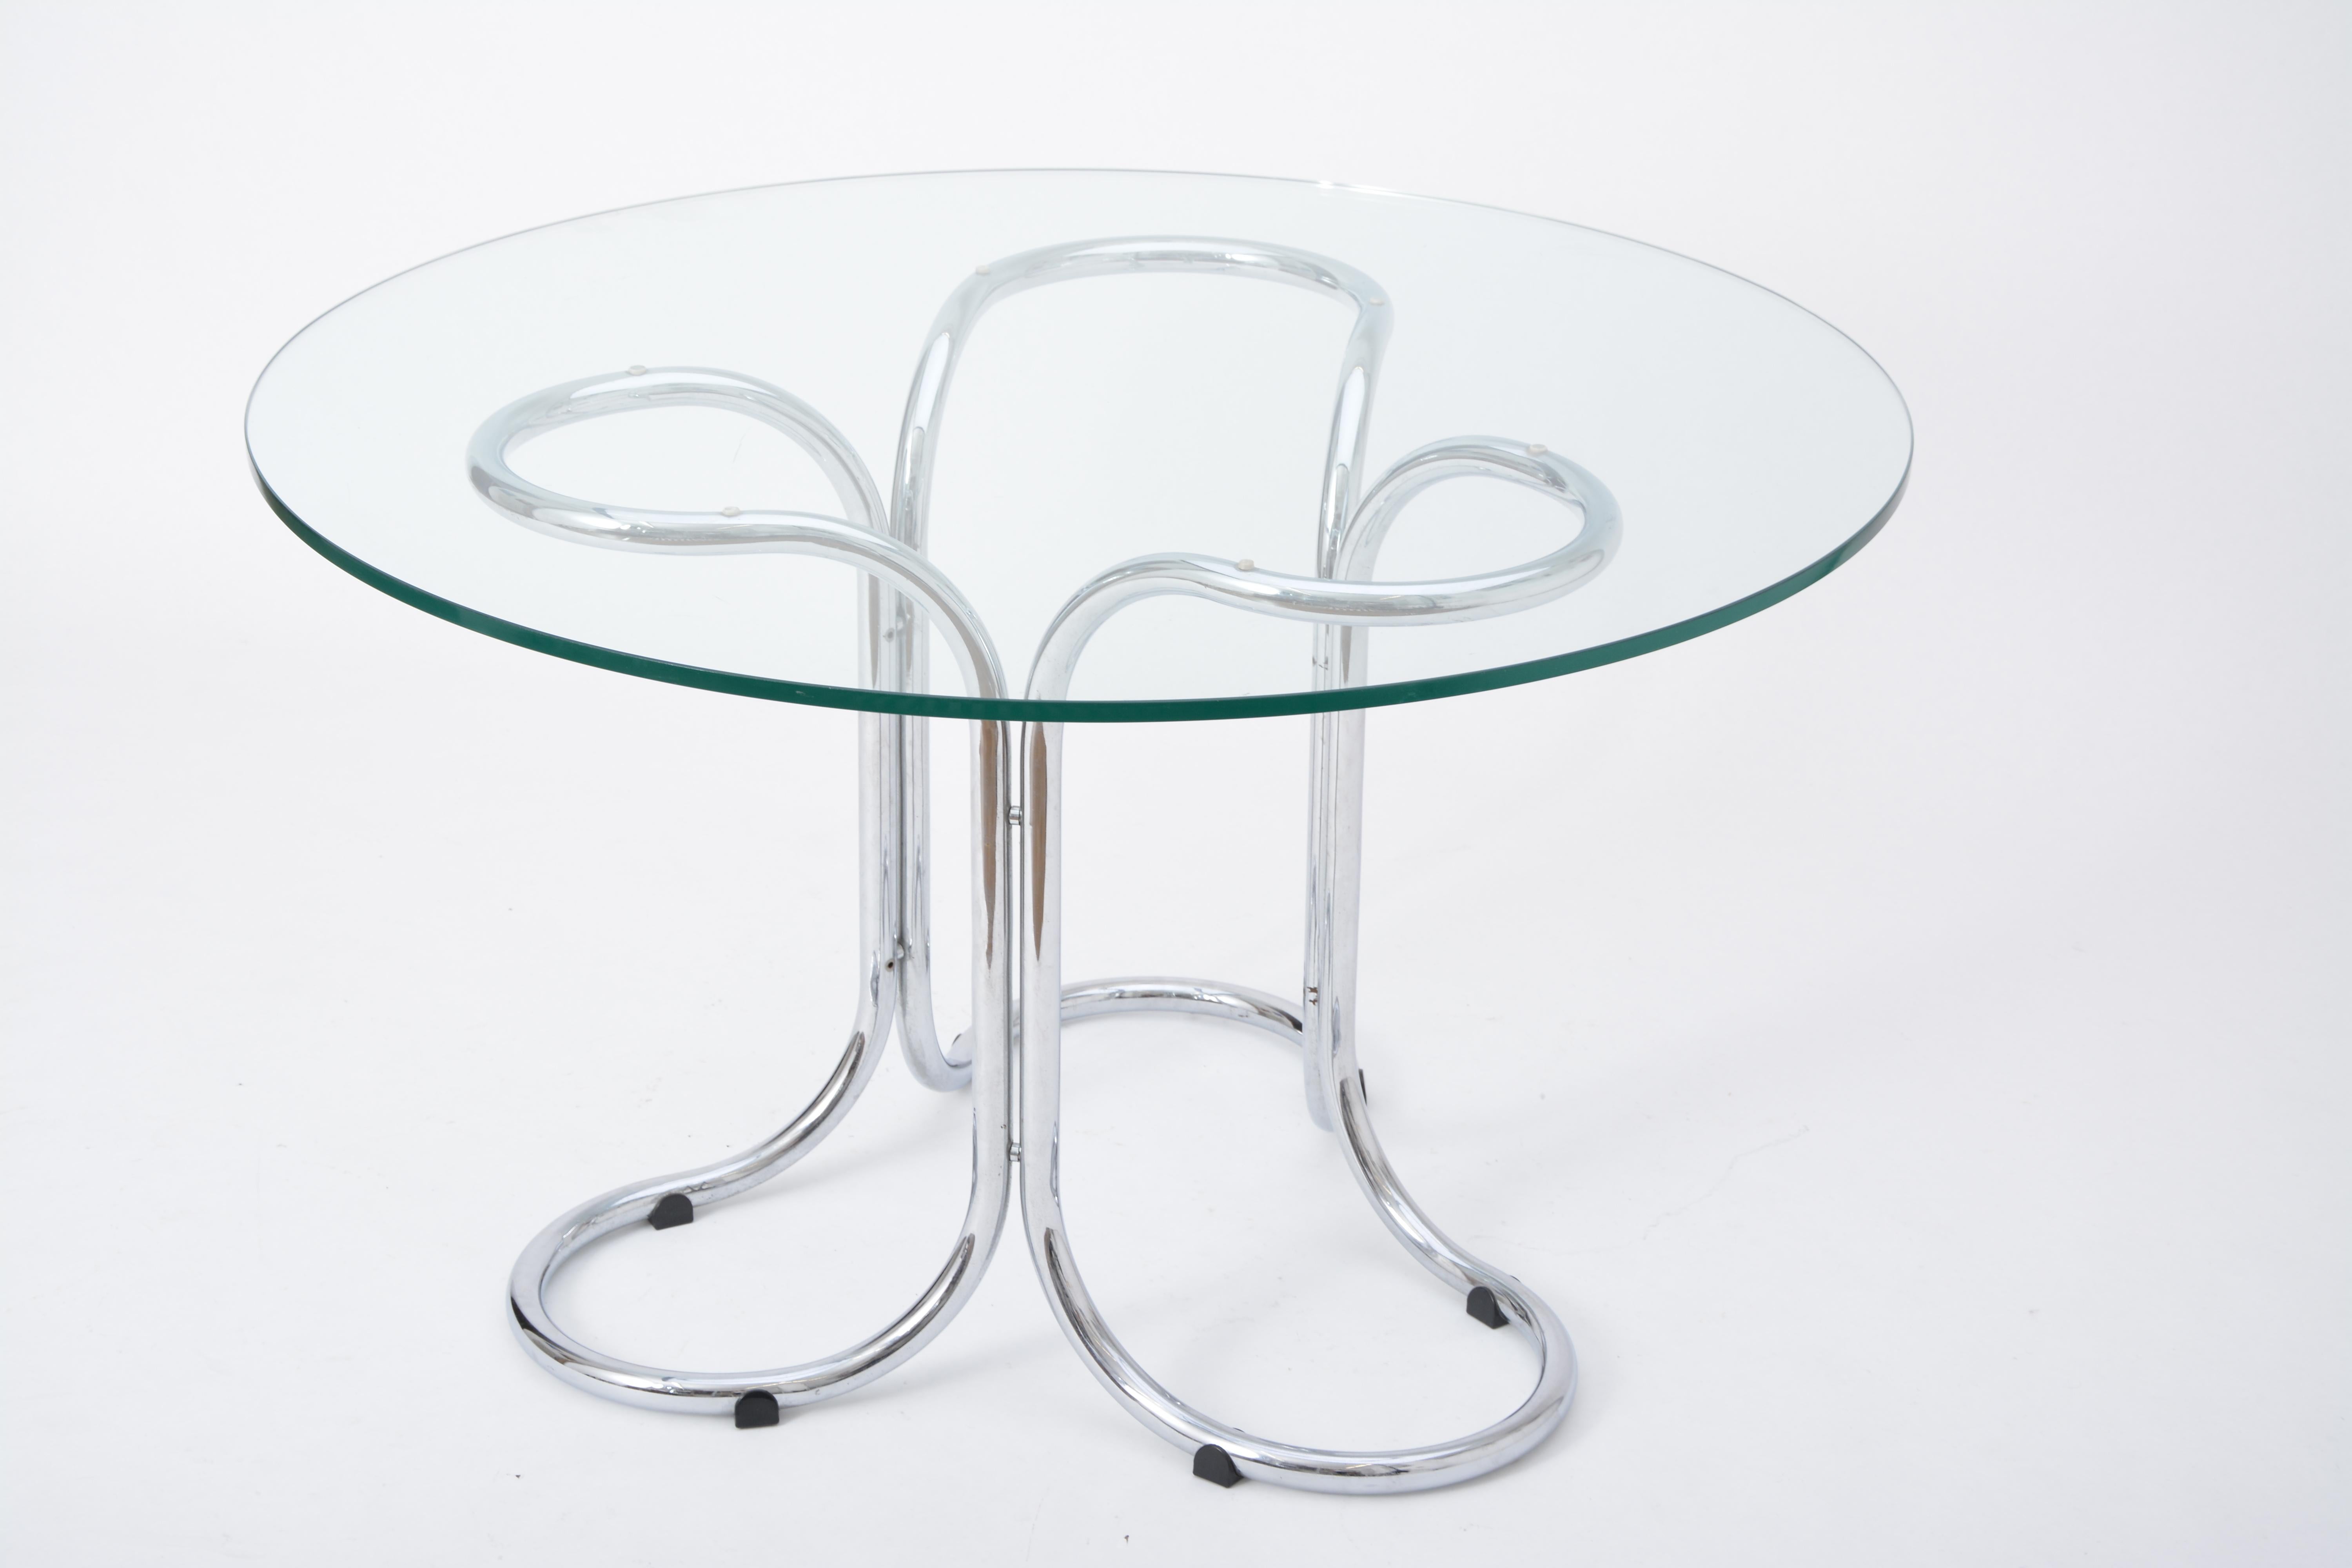 Circular Mid-Century Modern Glass table in the style of Giotto Stoppino

This glass table was produced in the style of Giotto Stoppino. It is made from a chromed steel base which resembles the shape of a flower petal and a circular glass top.